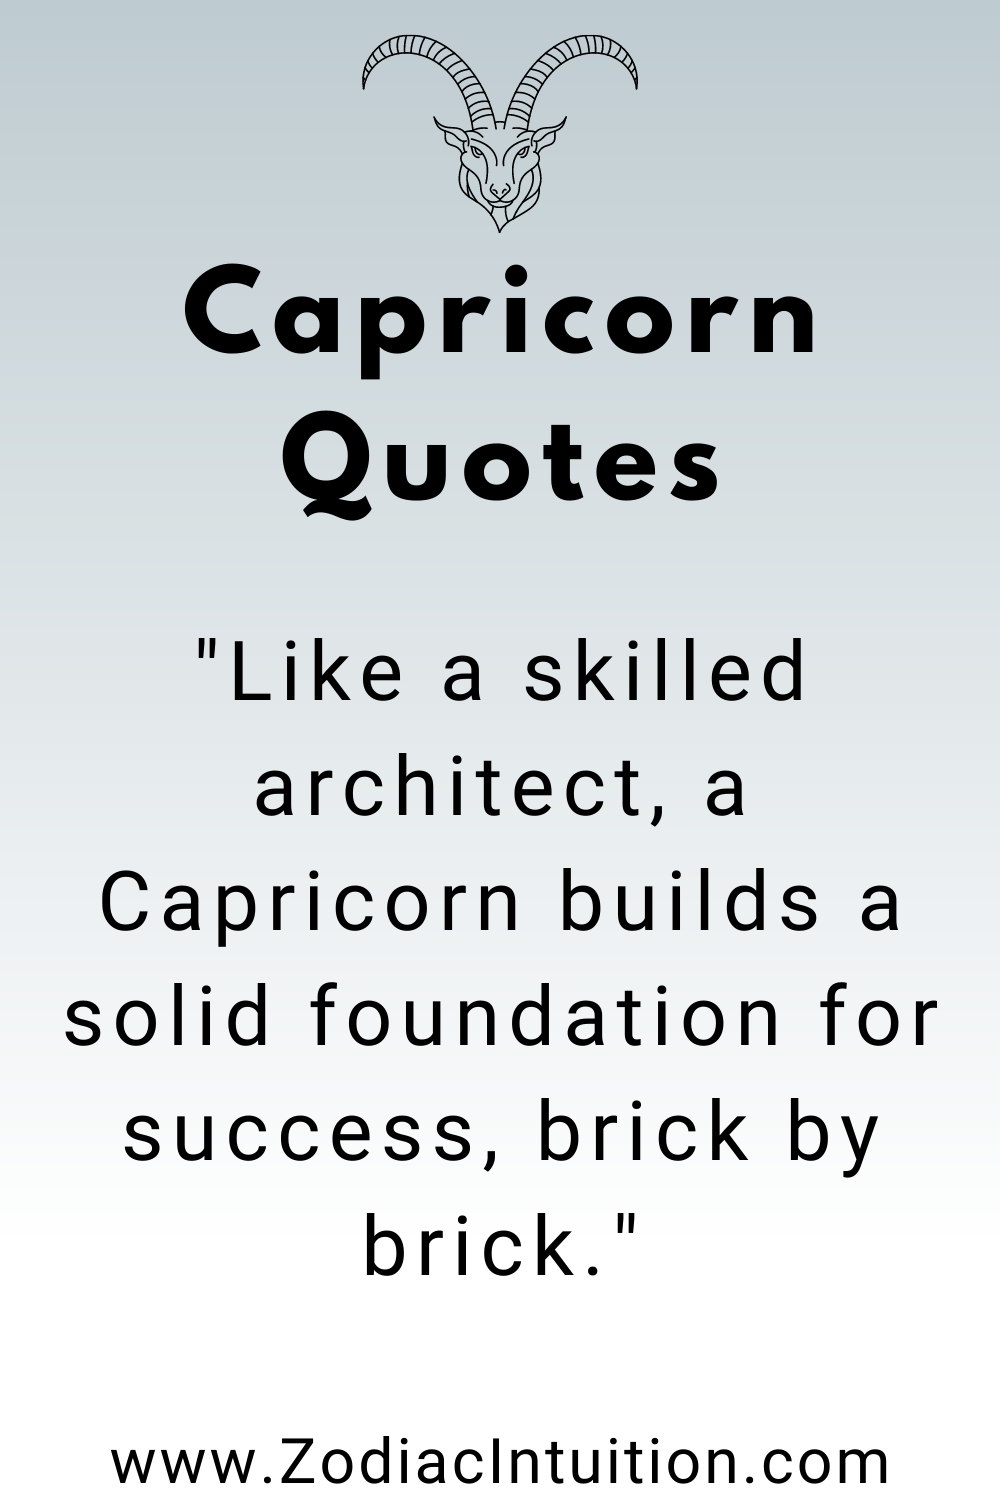 Top 5 Capricorn Quotes And Inspiration